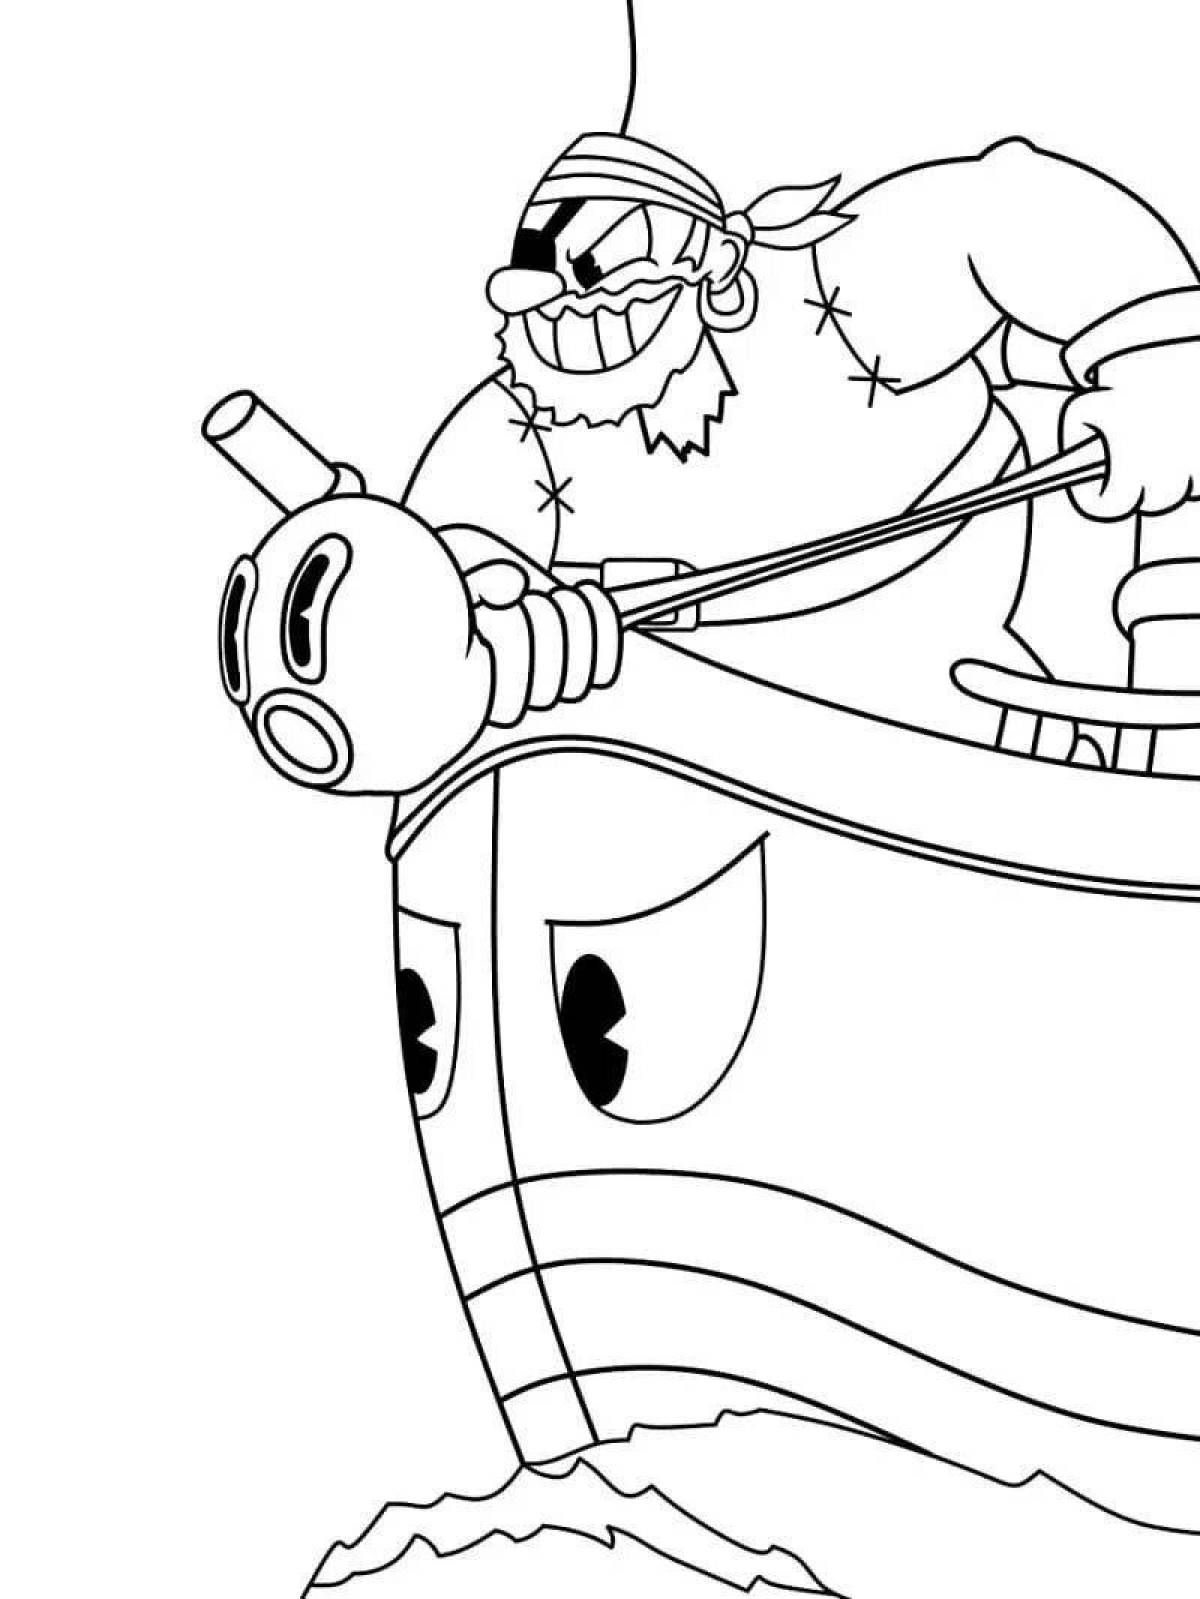 Fascinating cap coloring page